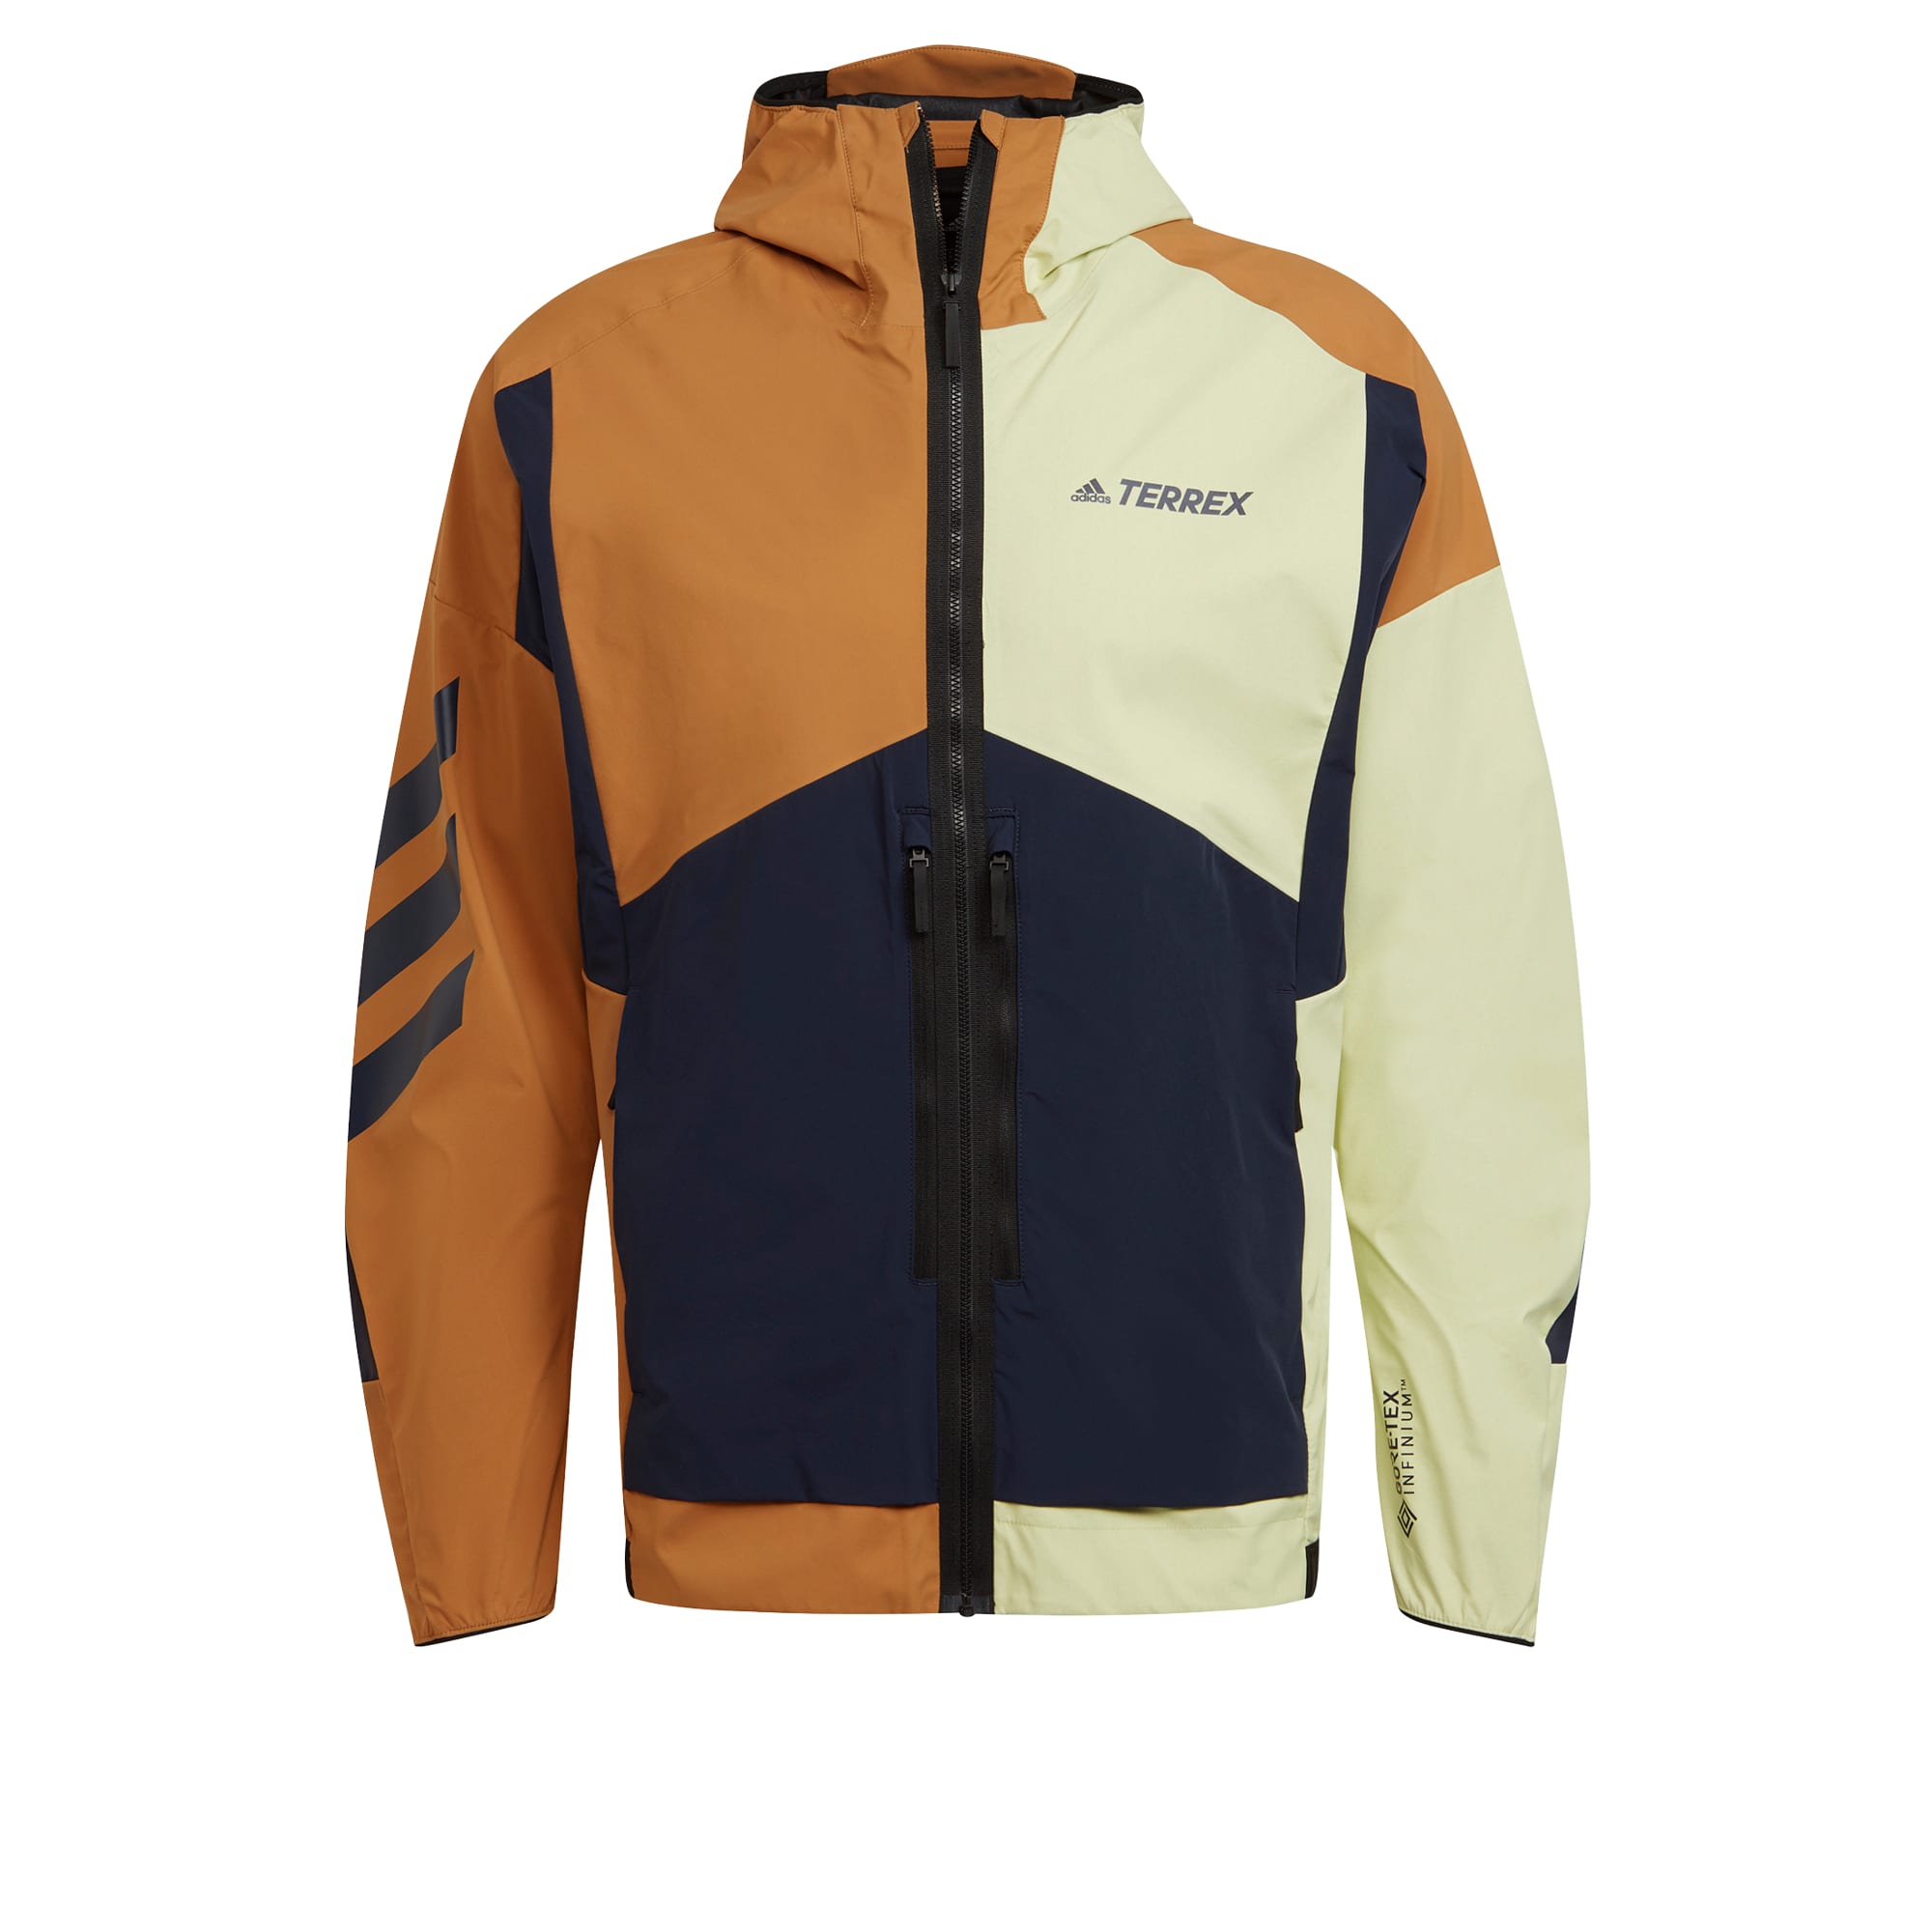 Adidas Men's Terrex Skyclimb Gore Soft Shell Touring Jacket from Outnorth